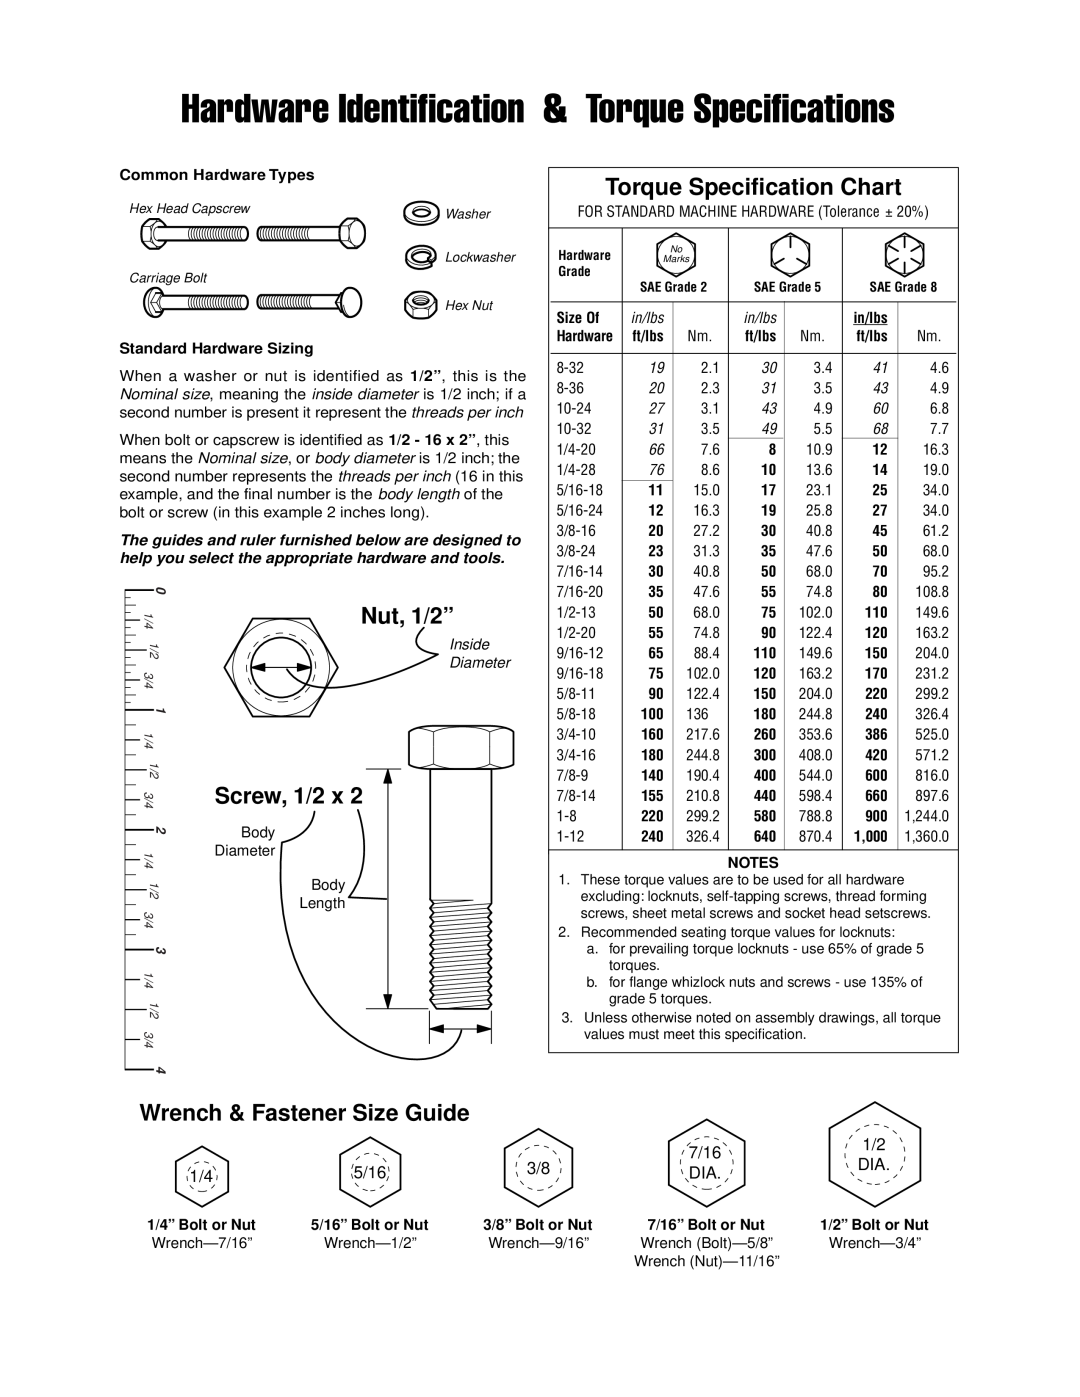 Snapper 2442 Wrench & Fastener Size Guide, 7/16, 5/16, Hardware Identification & Torque Specifications, Nut, 1/2”, Inside 